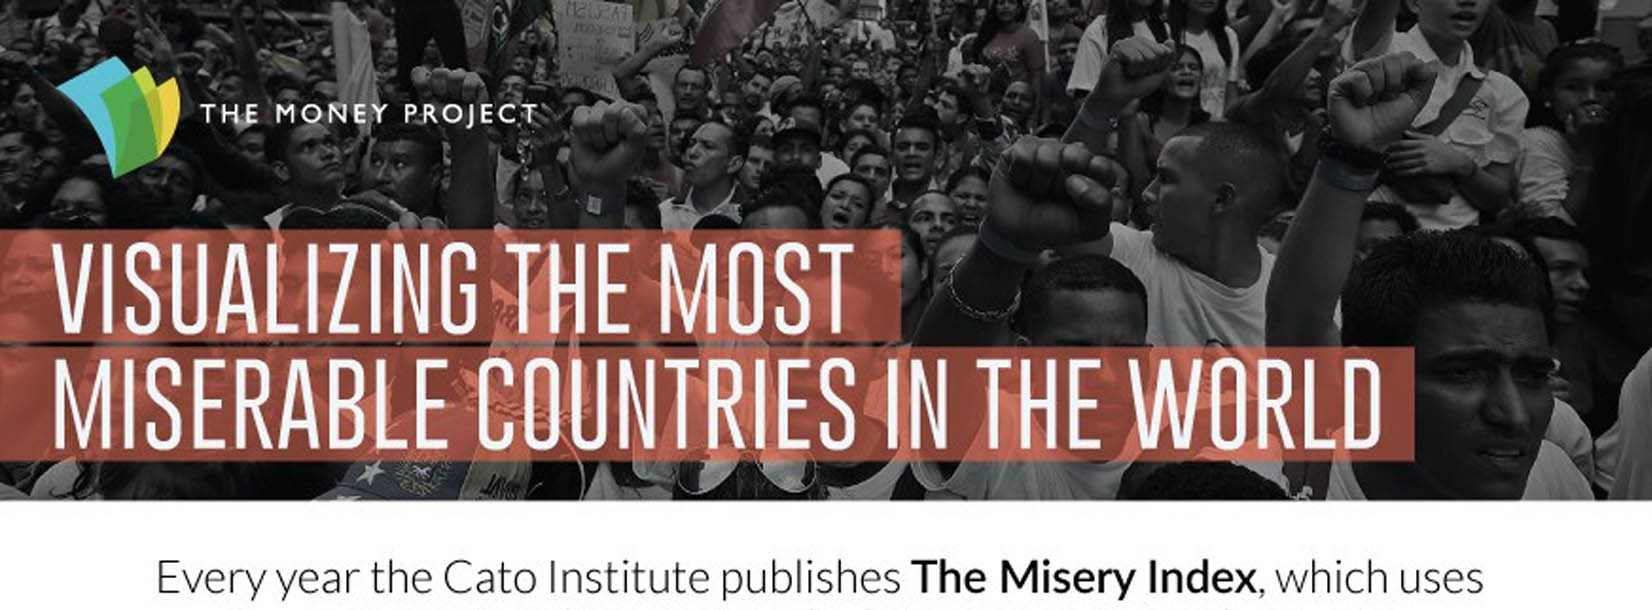 Visualizing the Most Miserable Countries in the World (Infographic)